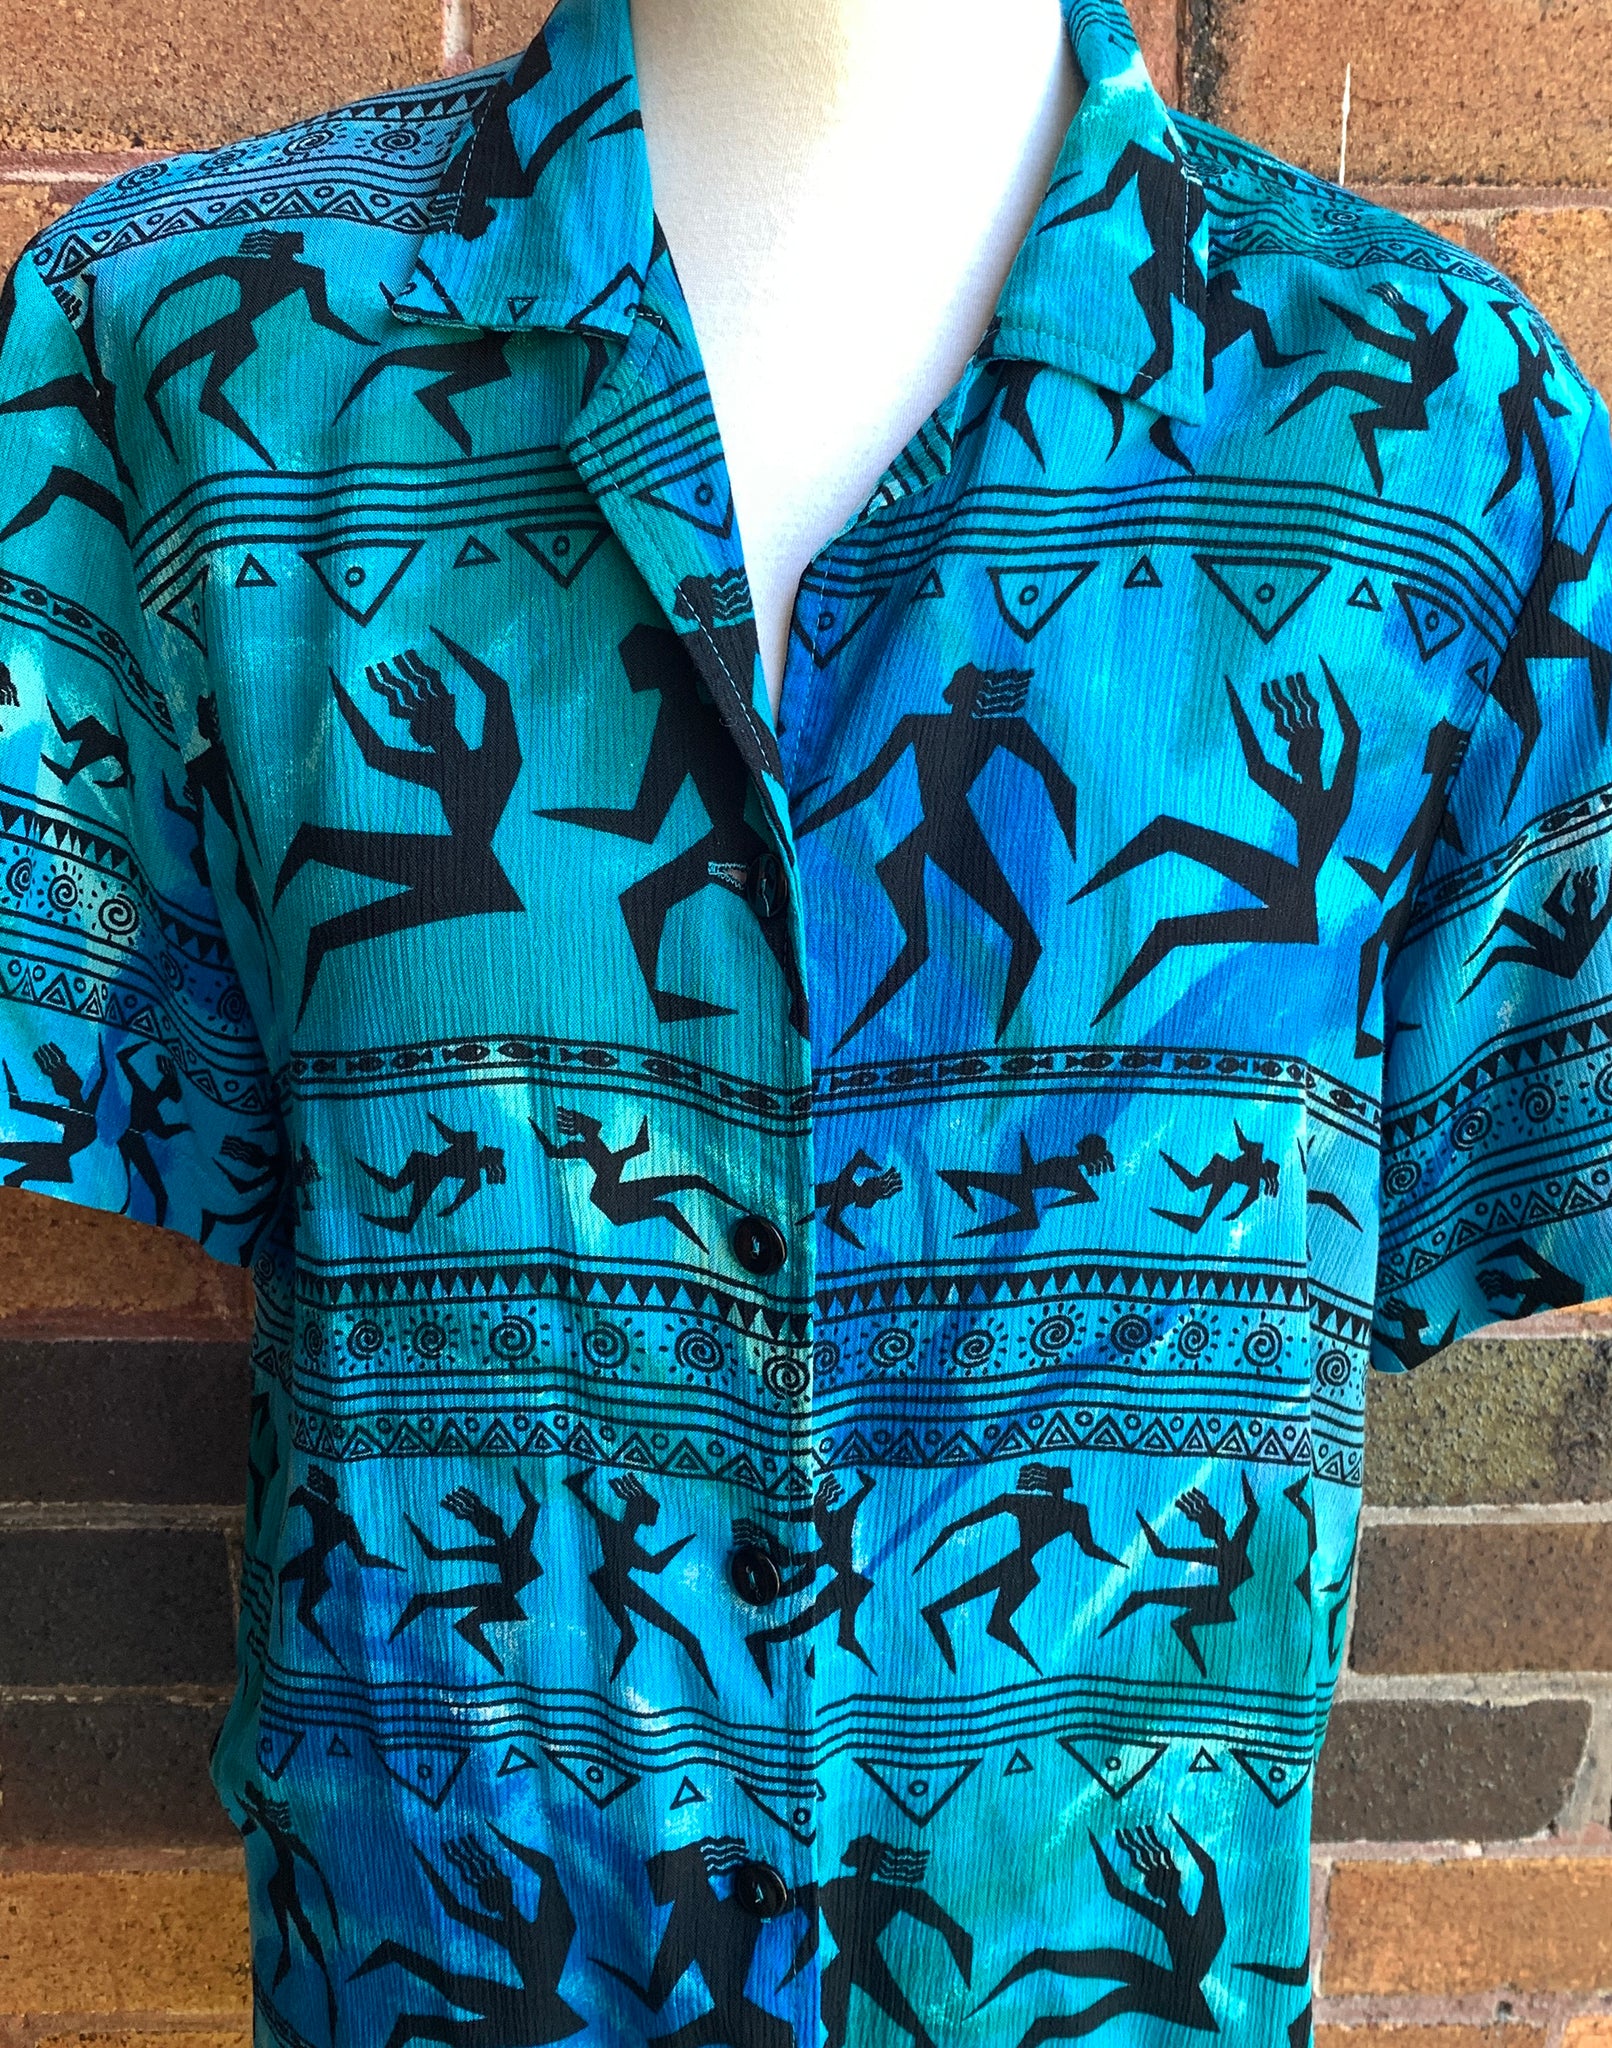 Vintage 80's Turquoise Printed Shirt - Size M/L